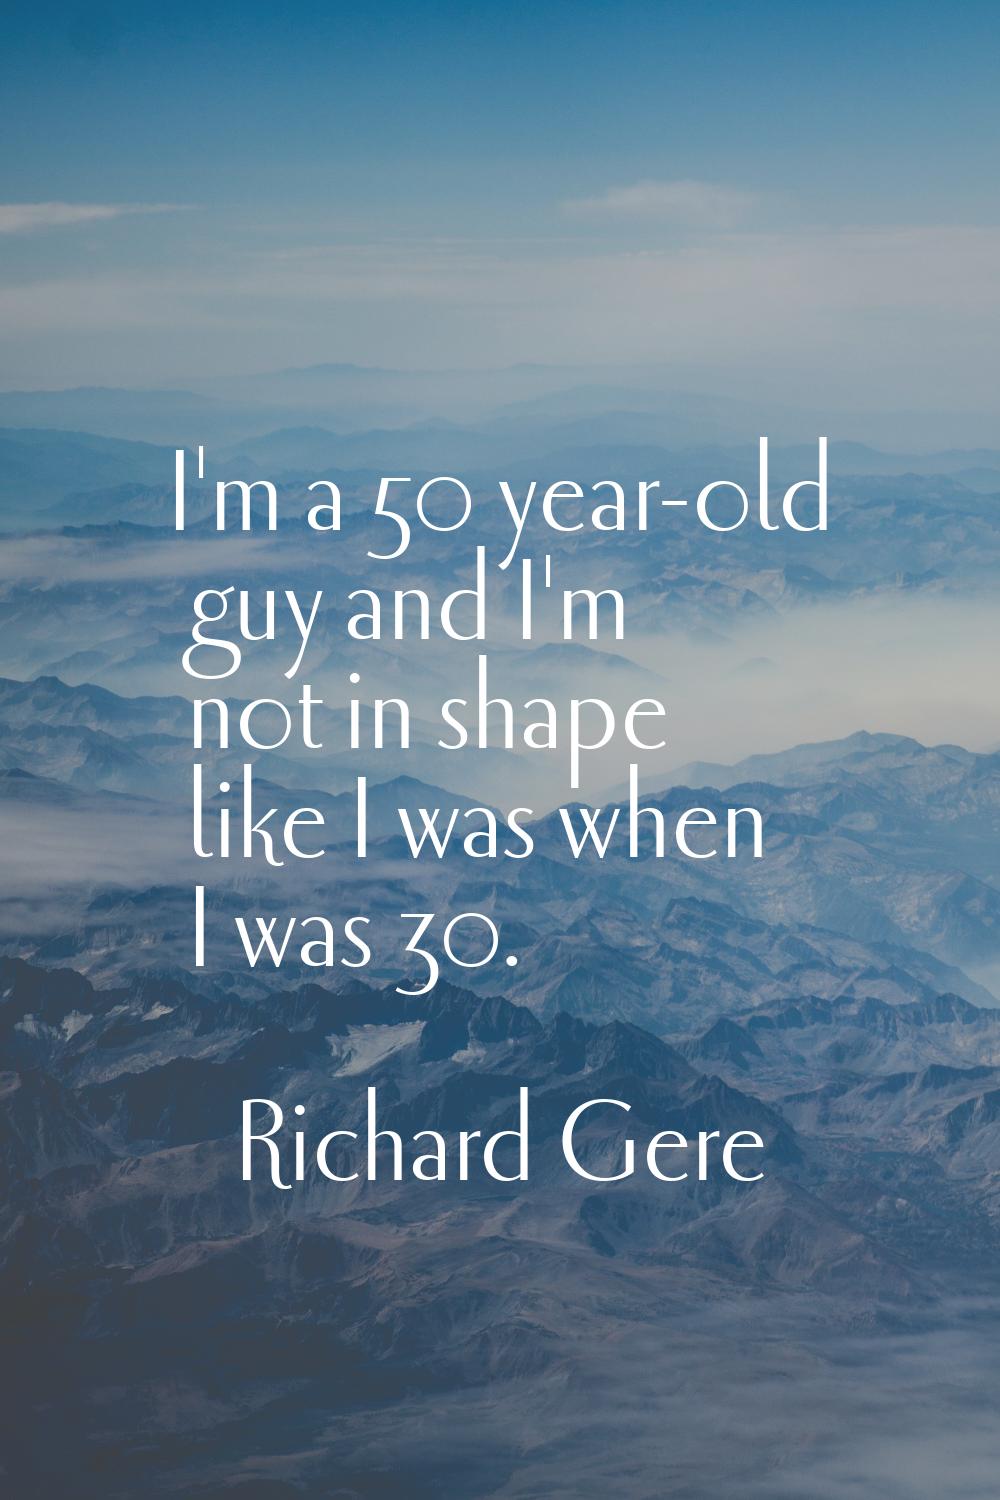 I'm a 50 year-old guy and I'm not in shape like I was when I was 30.